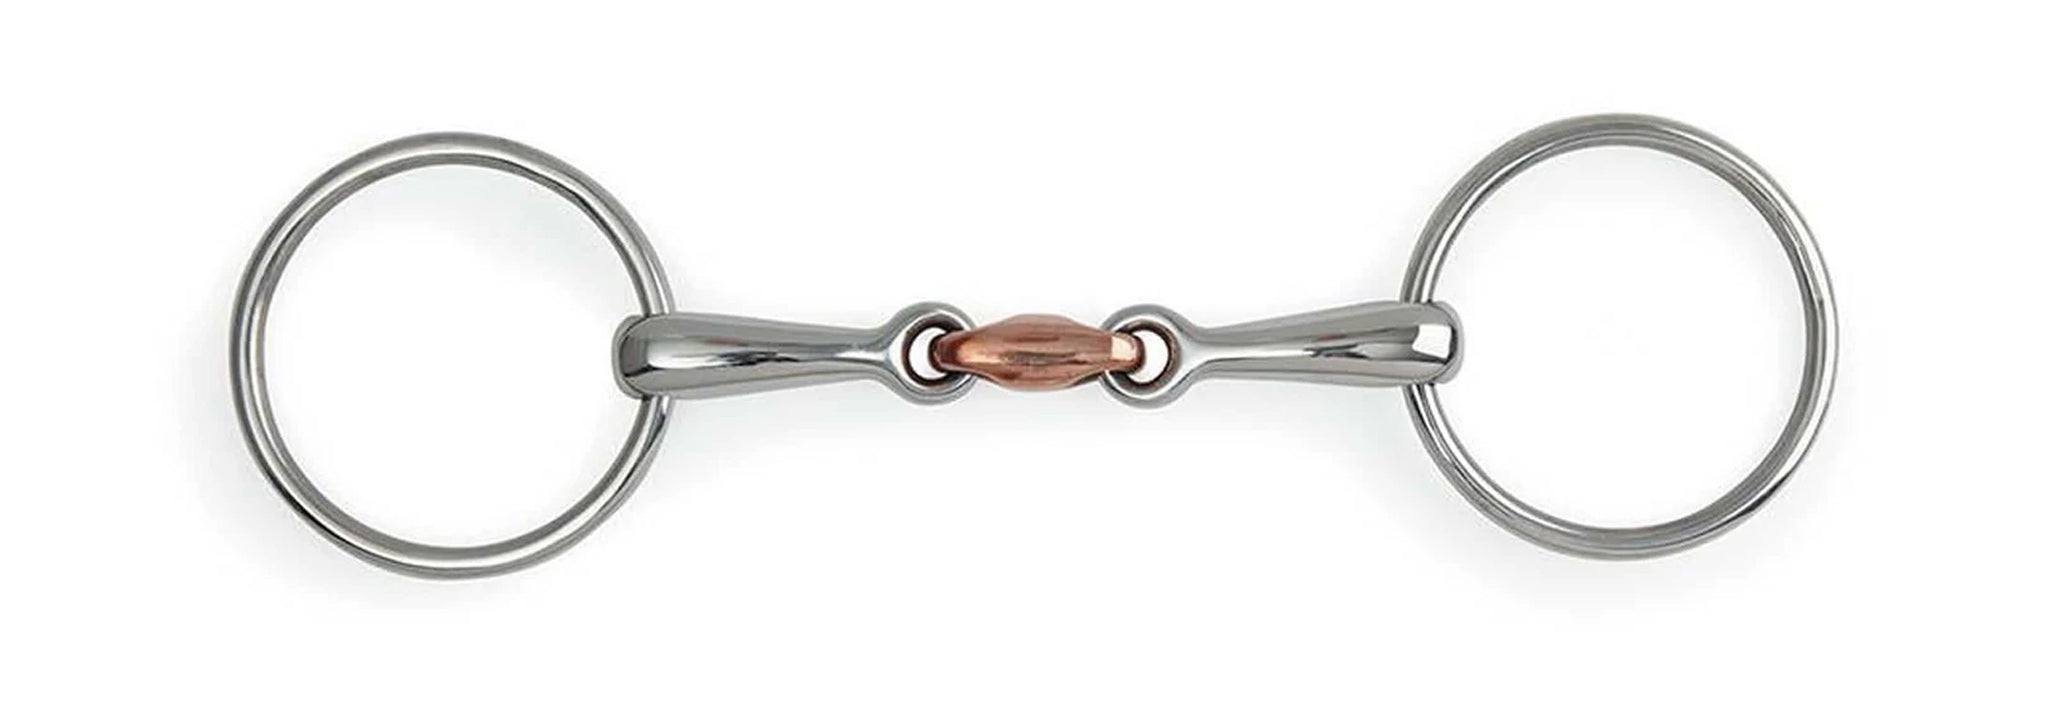 Bar H Equine Small Port Tongue Relief D Ring Horse Mouth Snaffle Bit w/ Copper Roller|Copper Bits for Horses|Horse Bit |horse bits|snaffle Copper Bits